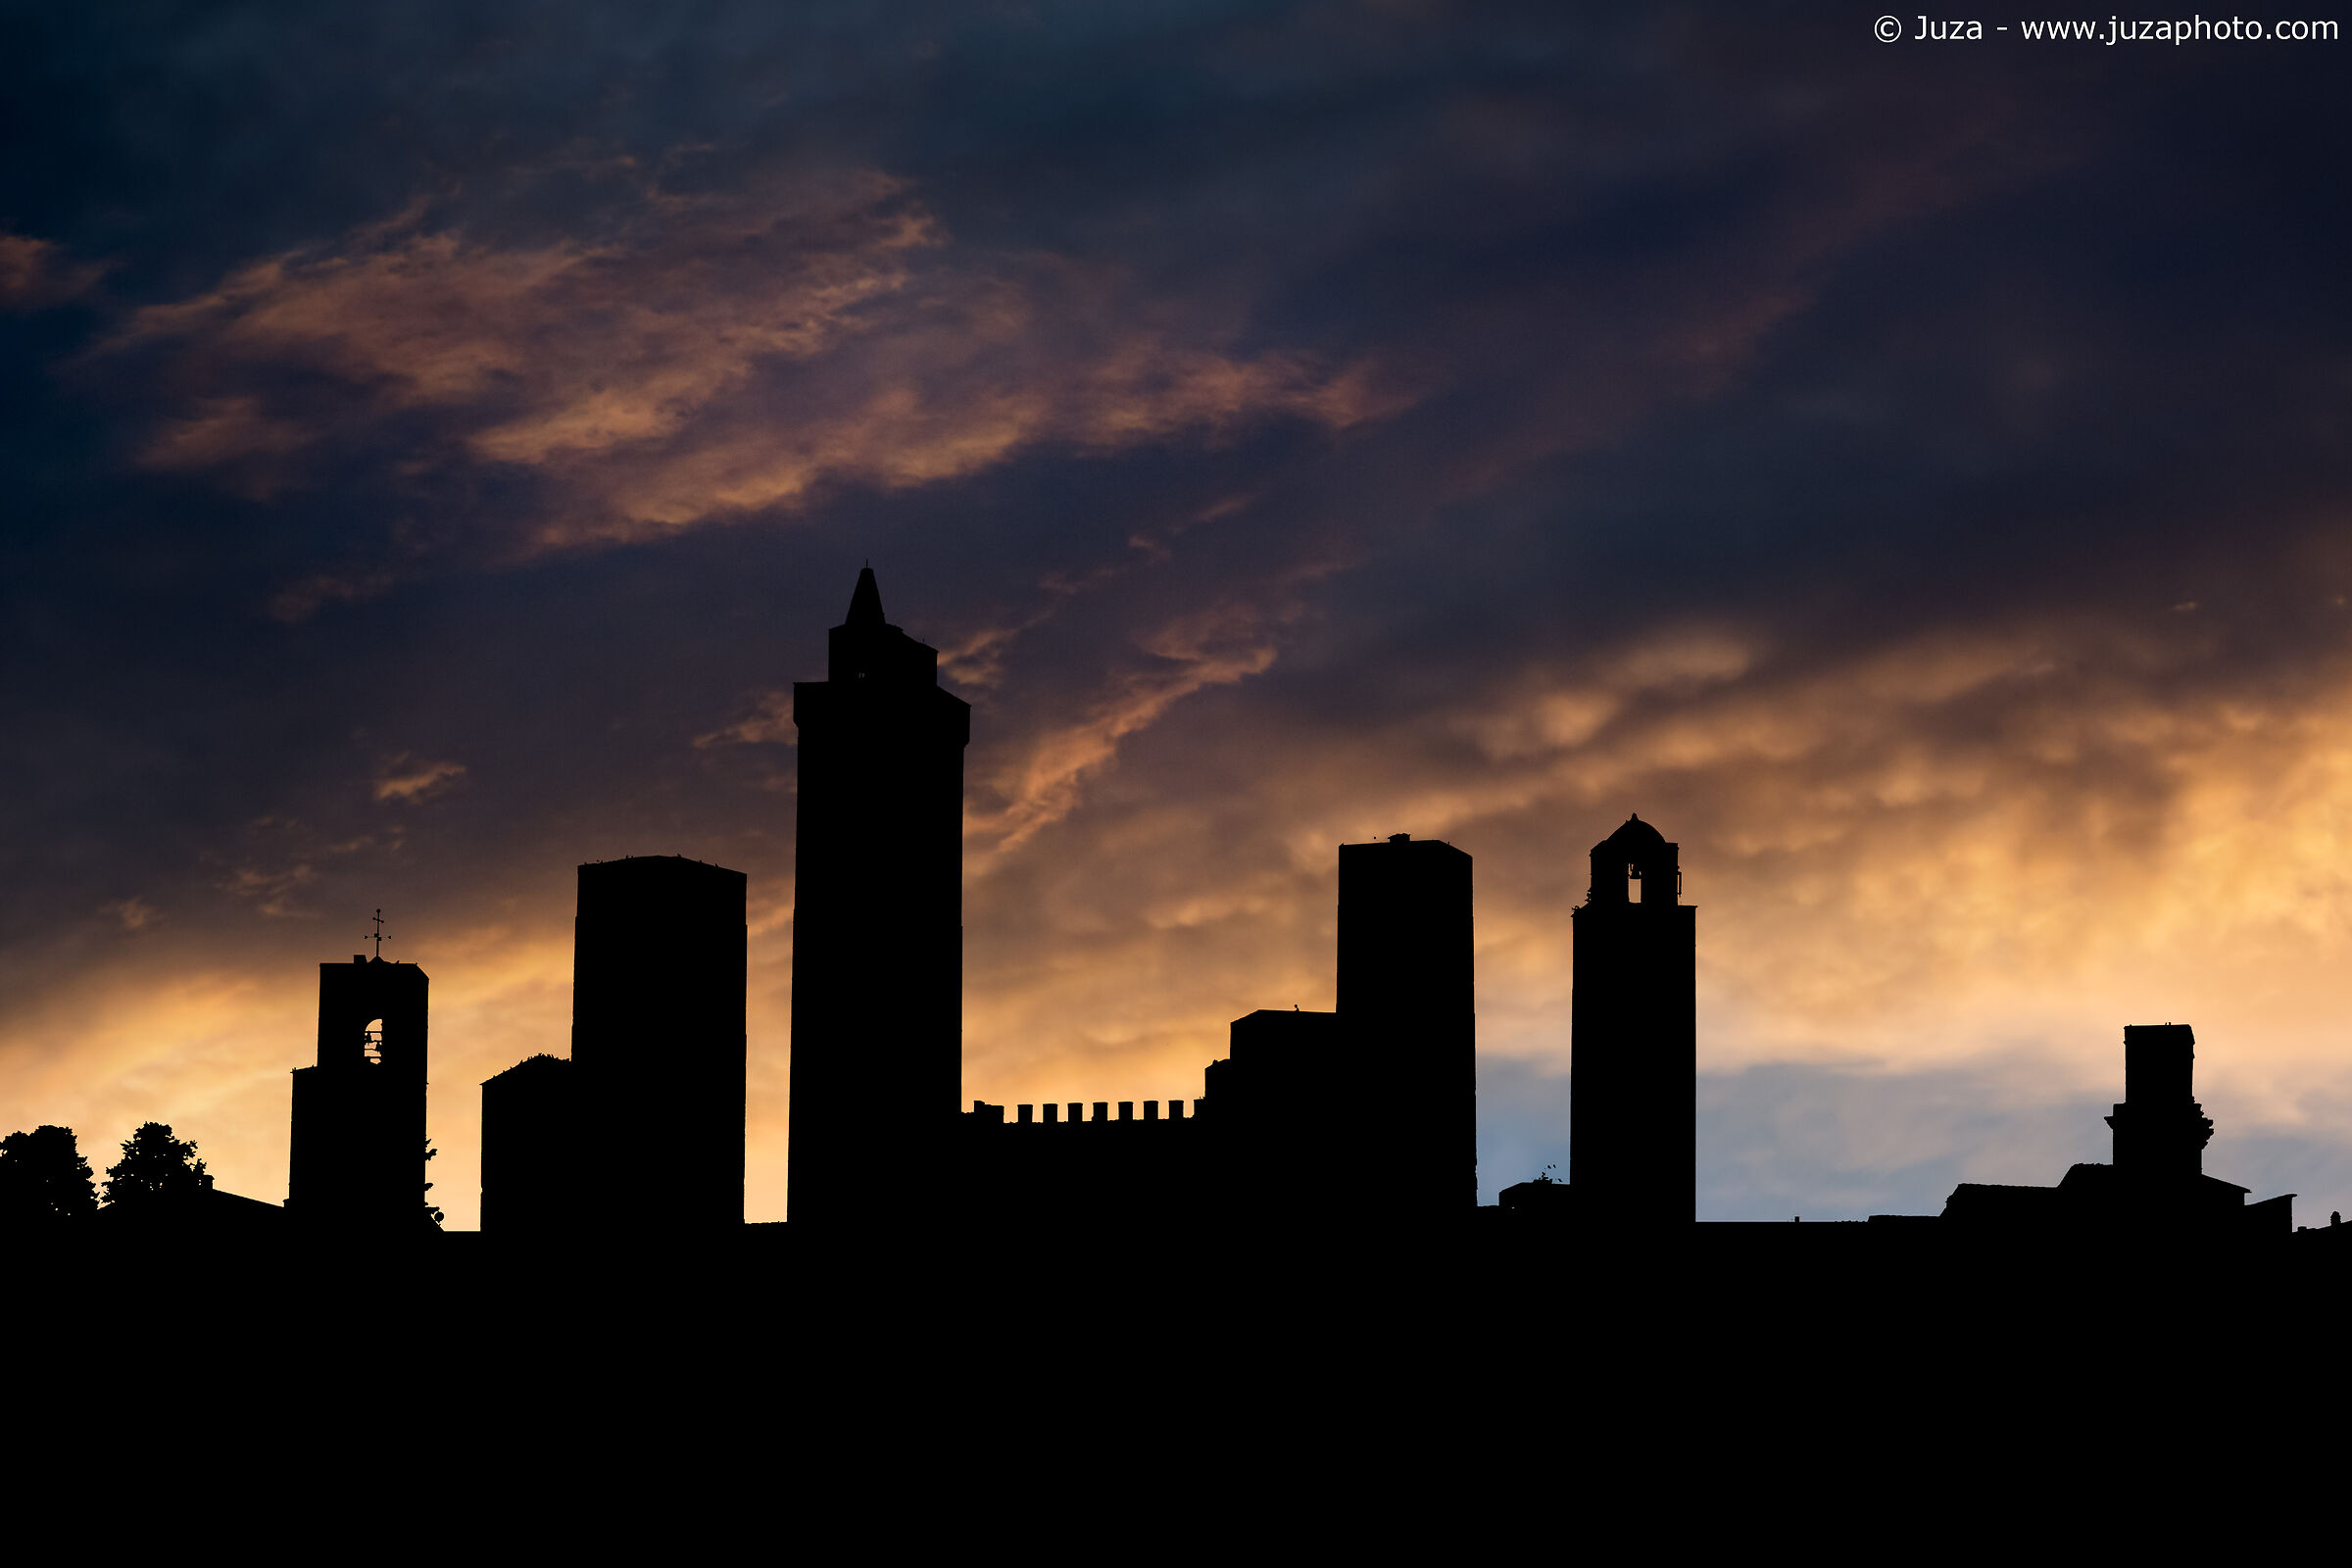 The towers of San Gimignano, at sunset...